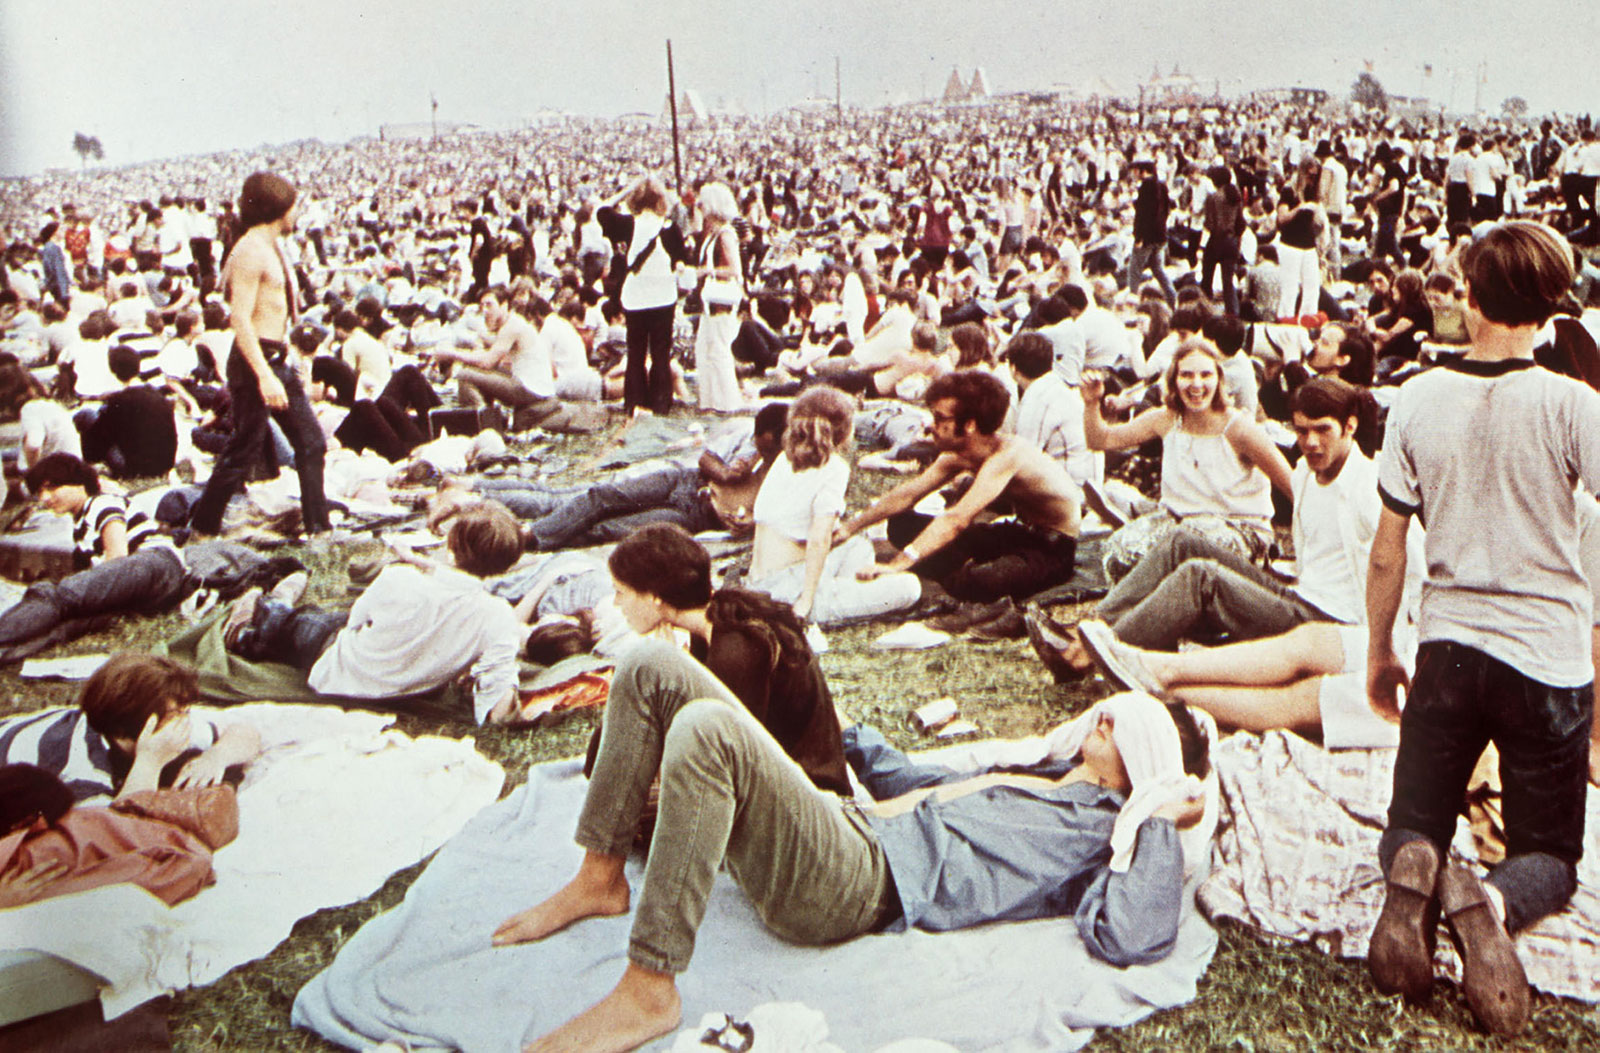 Can You Make It to the End of This Increasingly Difficult History Quiz? Film Still Documentary Woodstock Music Art Fair August 1969 Bethel New York